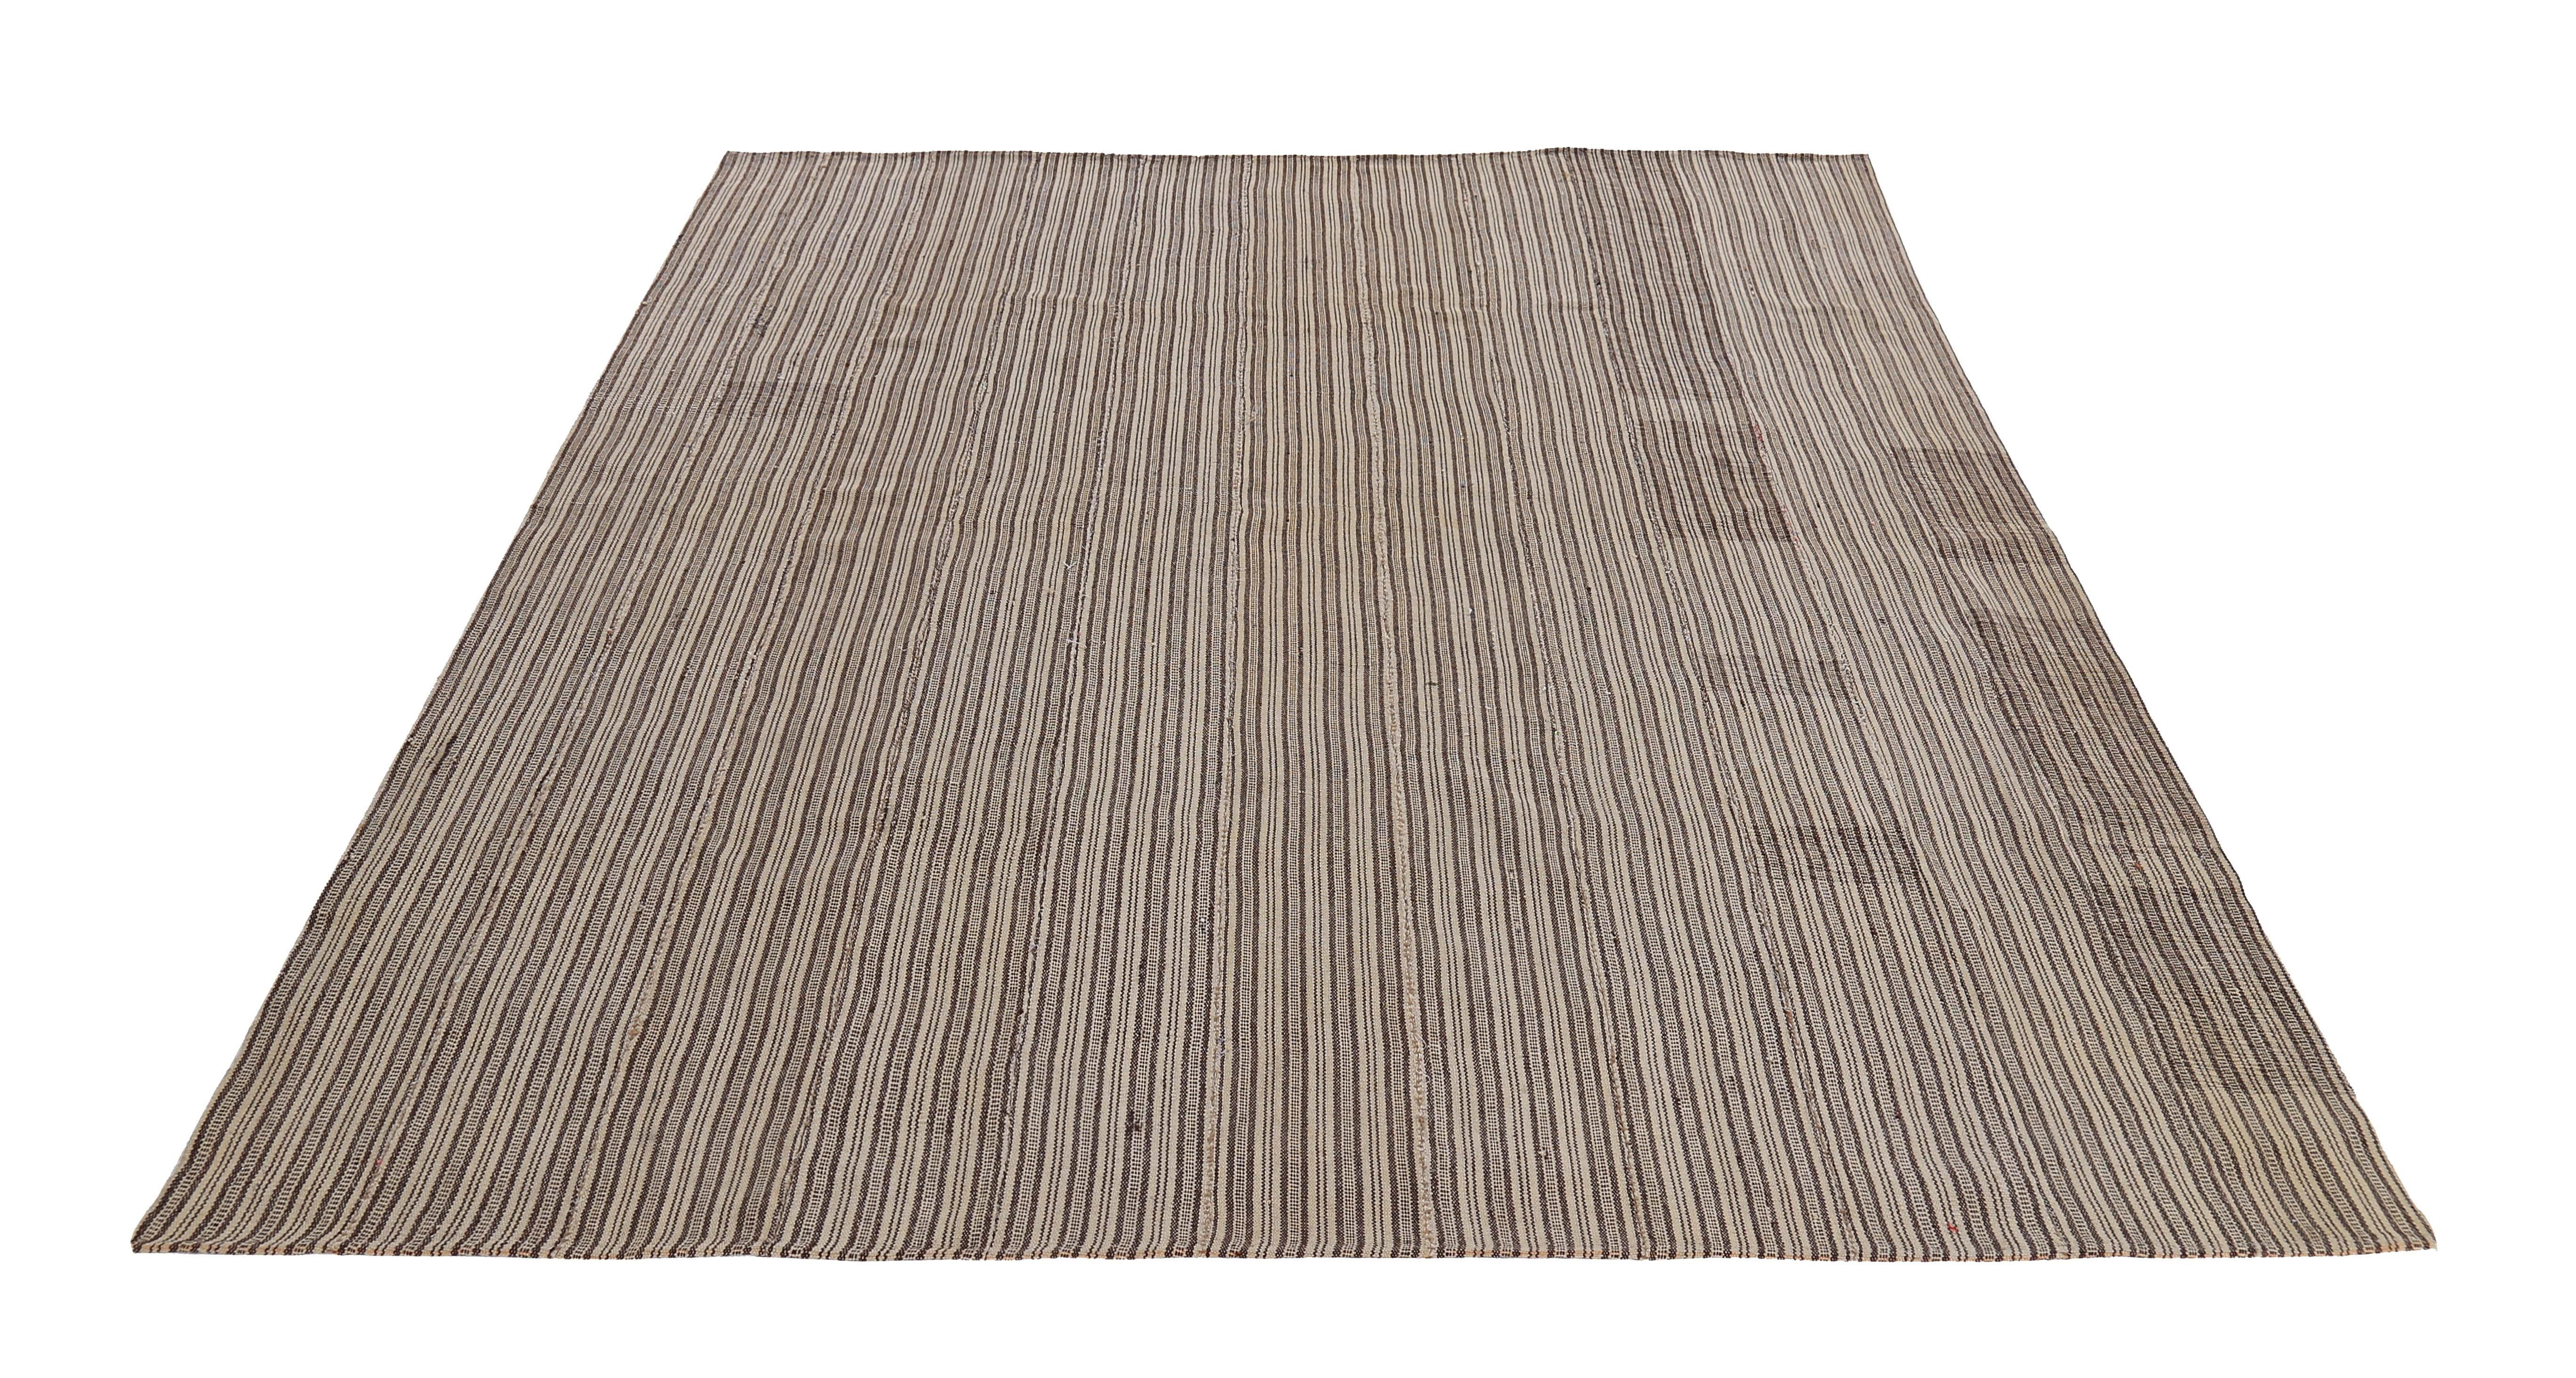 Modern Turkish rug handwoven from the finest sheep’s wool and colored with all-natural vegetable dyes that are safe for humans and pets. It’s a traditional Kilim flat-weave design featuring beige and brown pencil stripes. It’s a stunning piece to